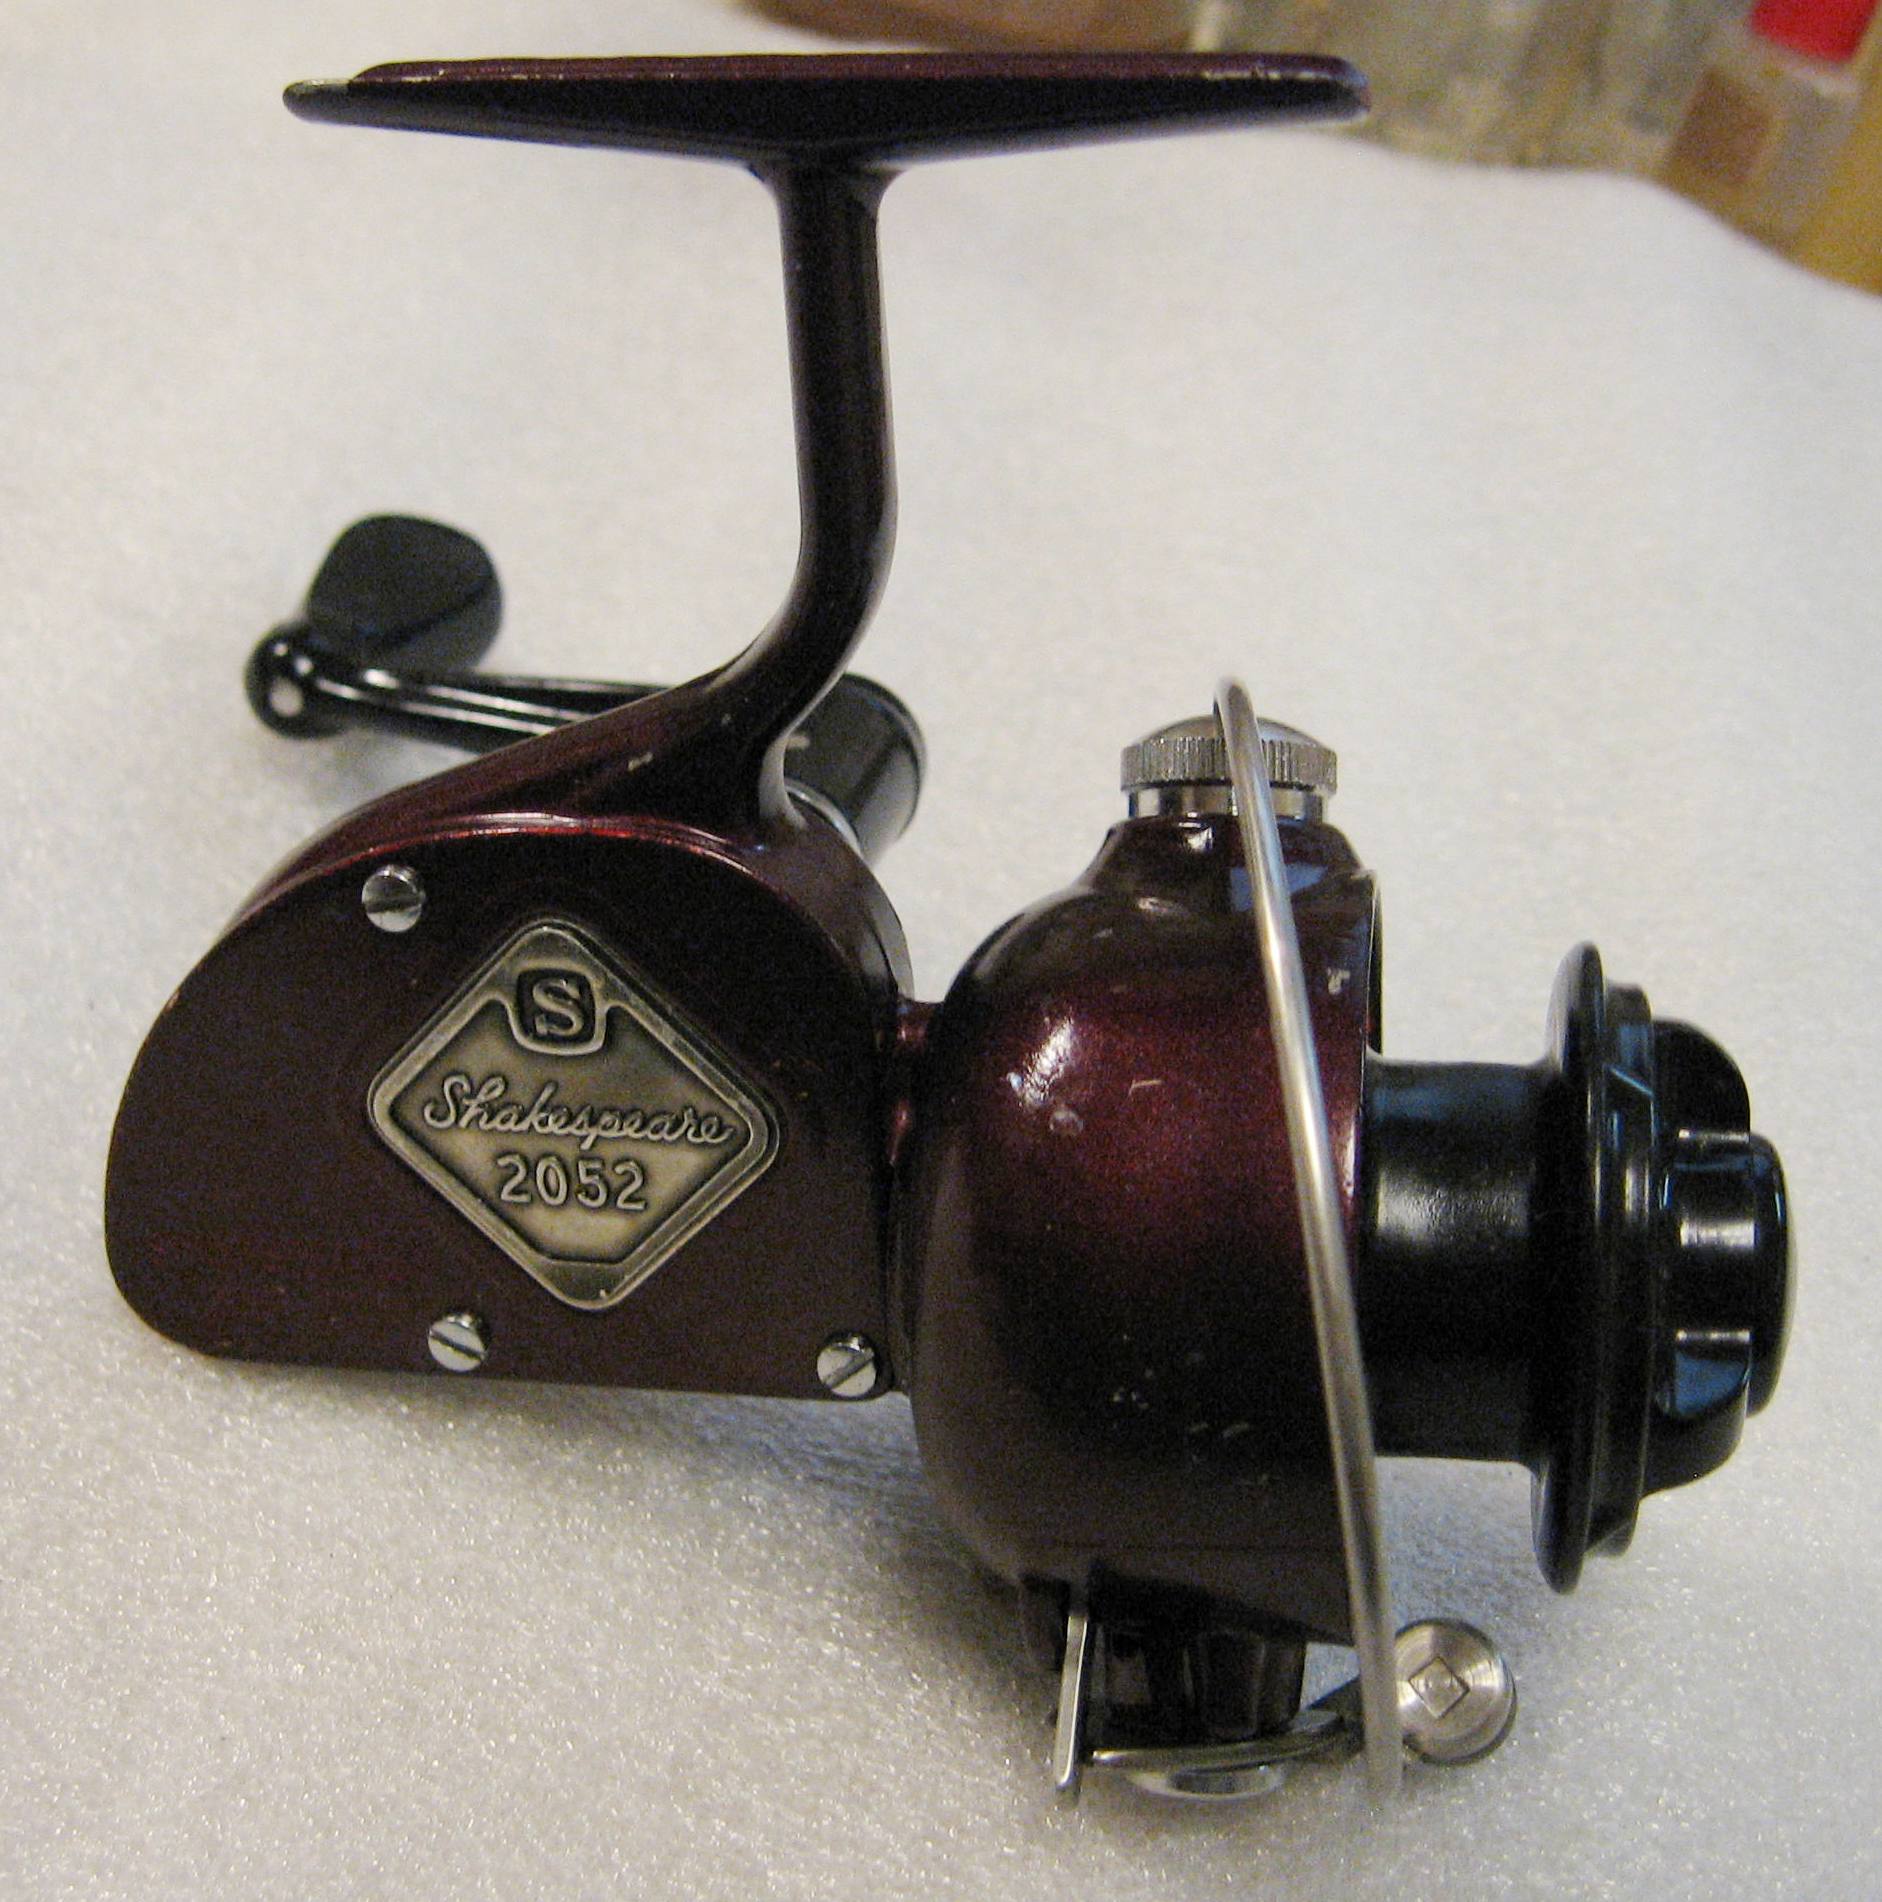 Shakespeare 1777 Spin Cast Reel - Cleaning and broken crank arm repair 